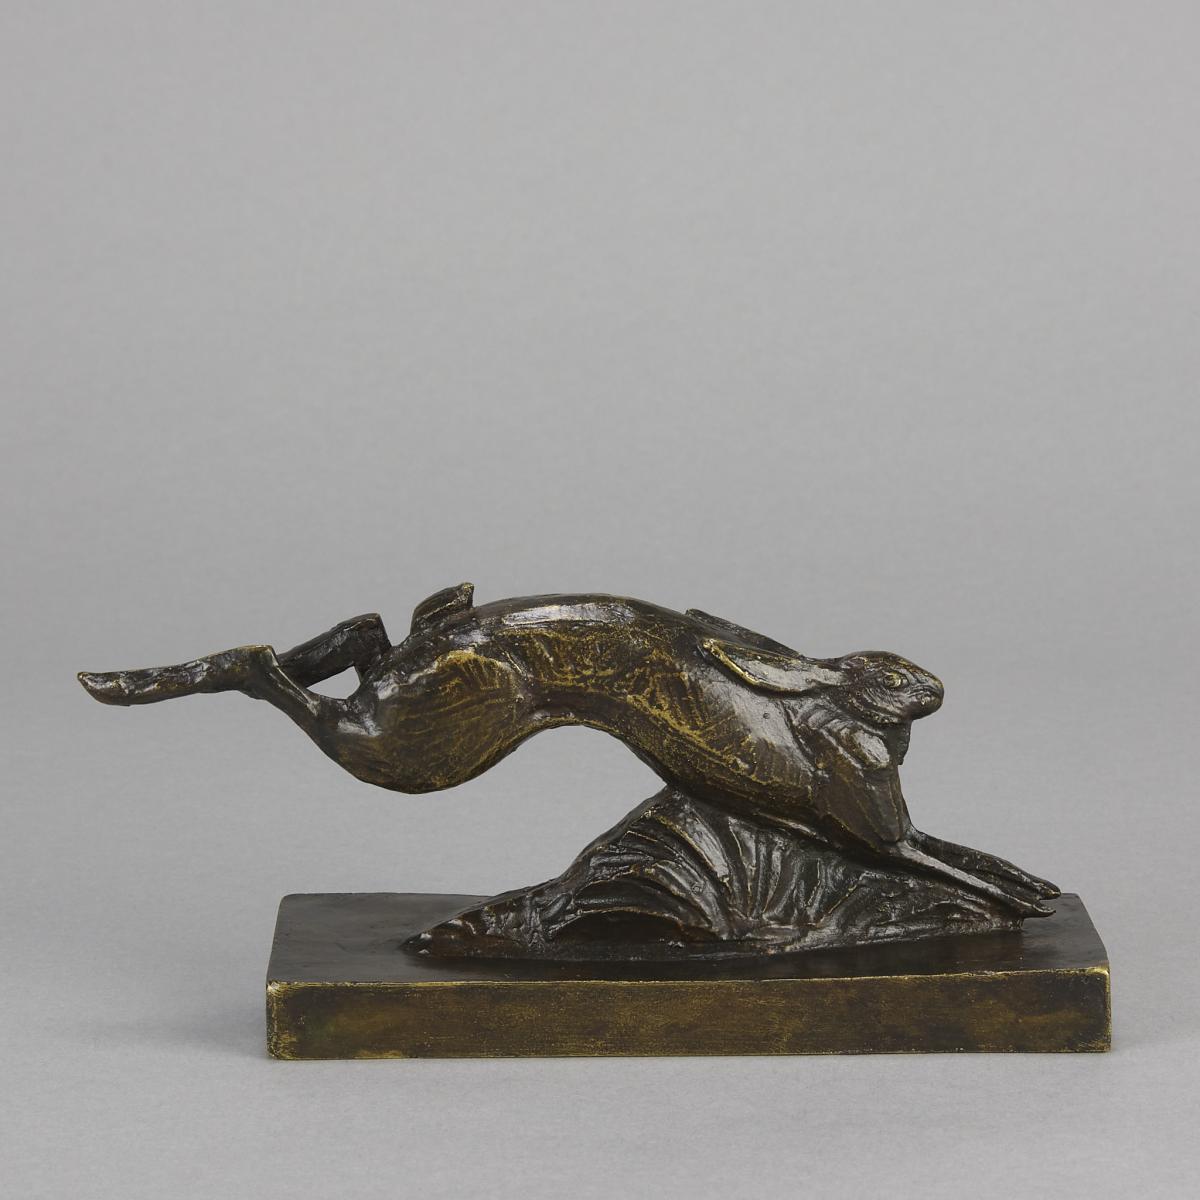 Art Deco Animalier Bronze Study Entitled "Running Hare" By Andre Becquerel